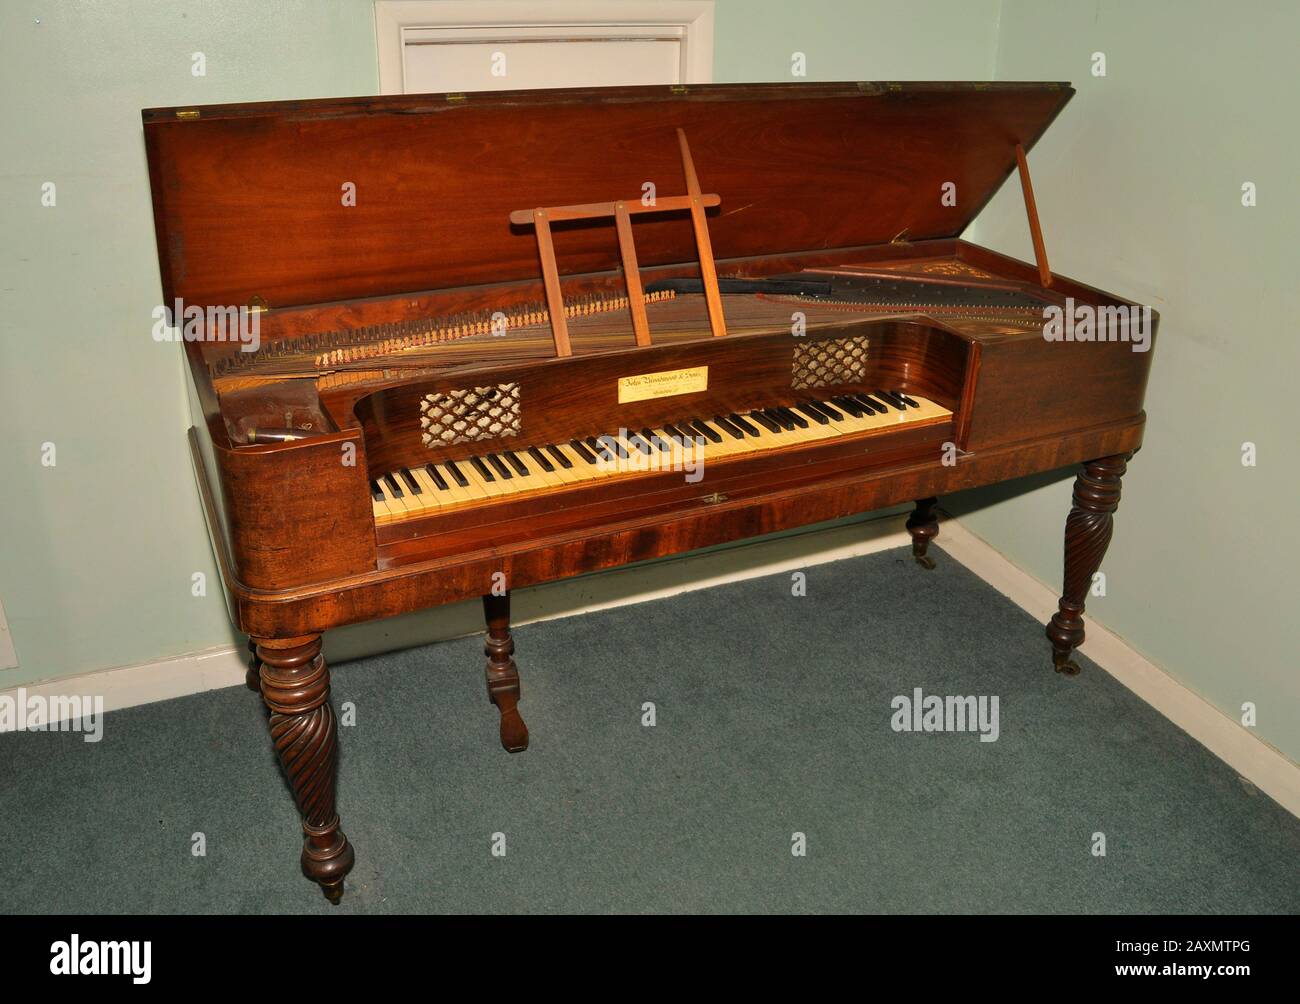 A John Broadwood square piano. A 6O SP Pl RC style piano.Made in their Horsferry Road workshop in London in 1835. England ,UK Stock Photo